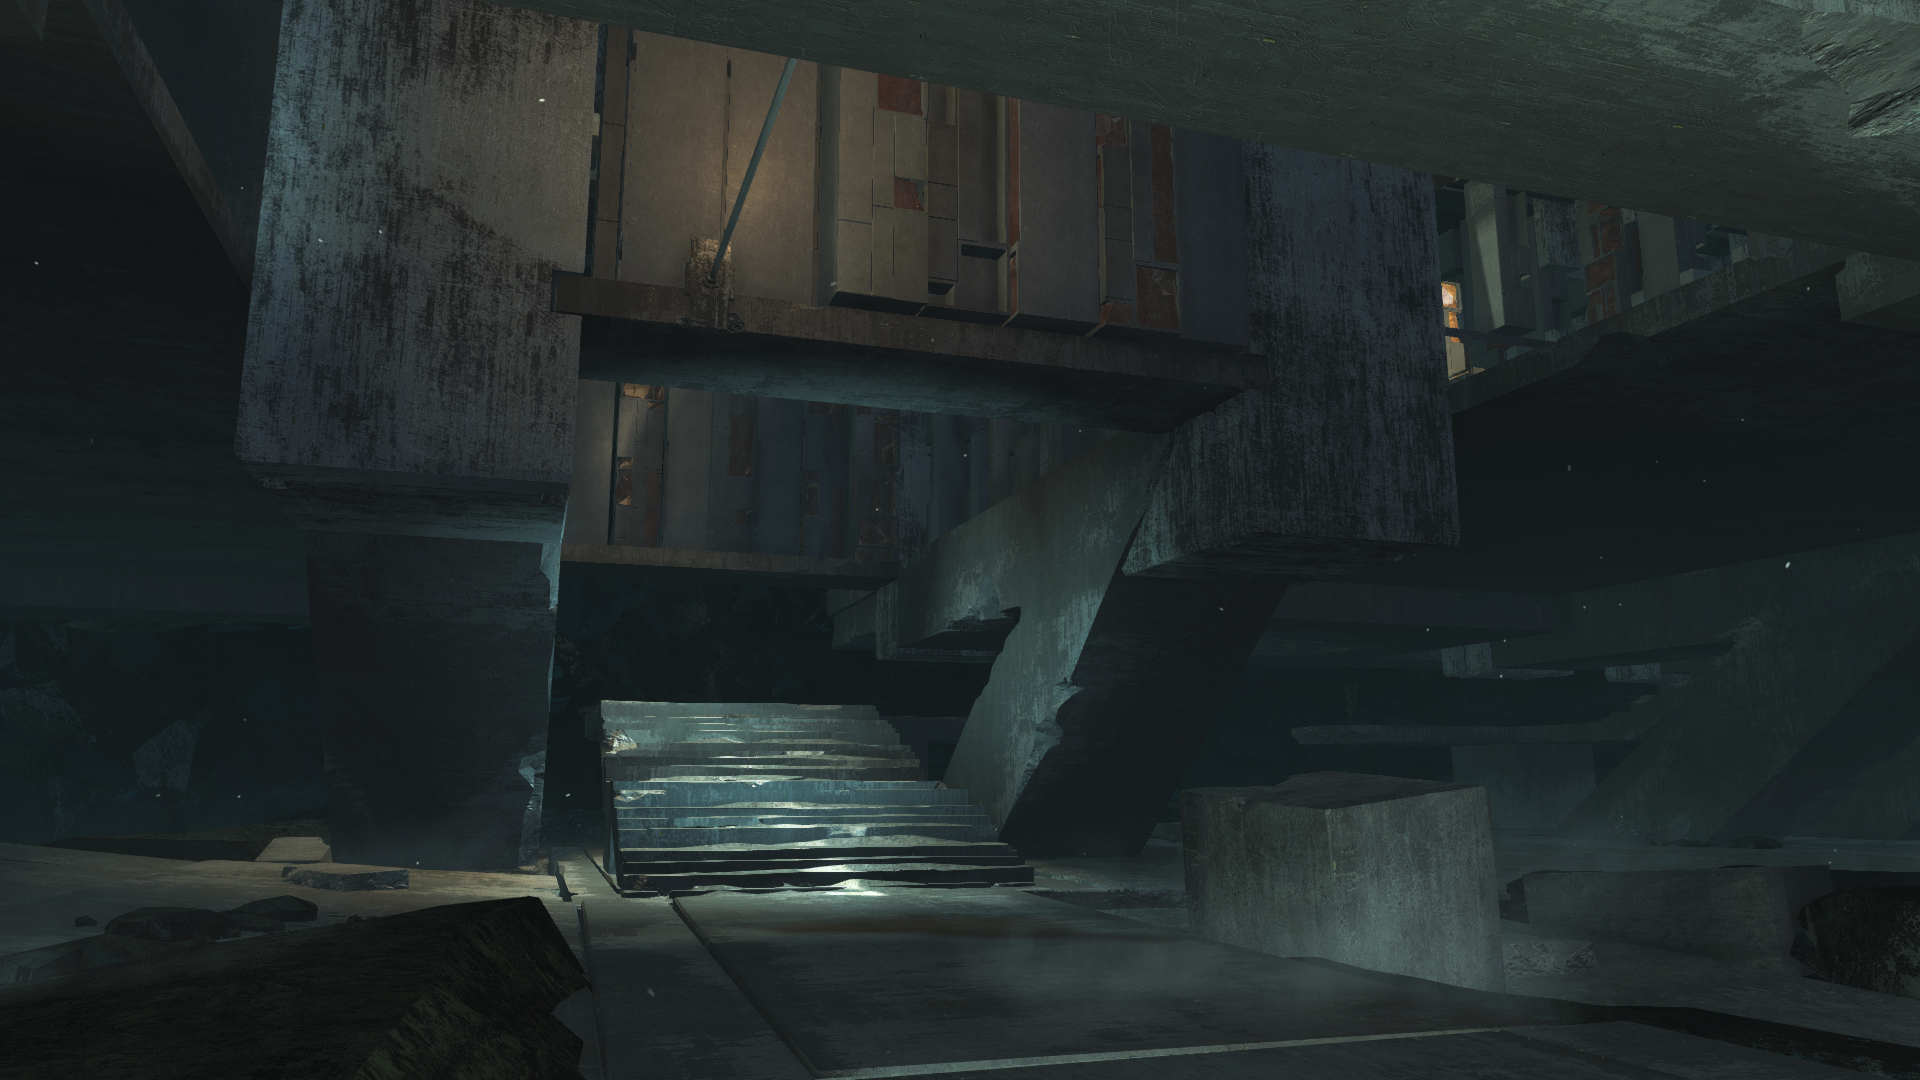 image-ac3-grand-temple-upper-level-stairs-png-assassin-s-creed-wiki-fandom-powered-by-wikia